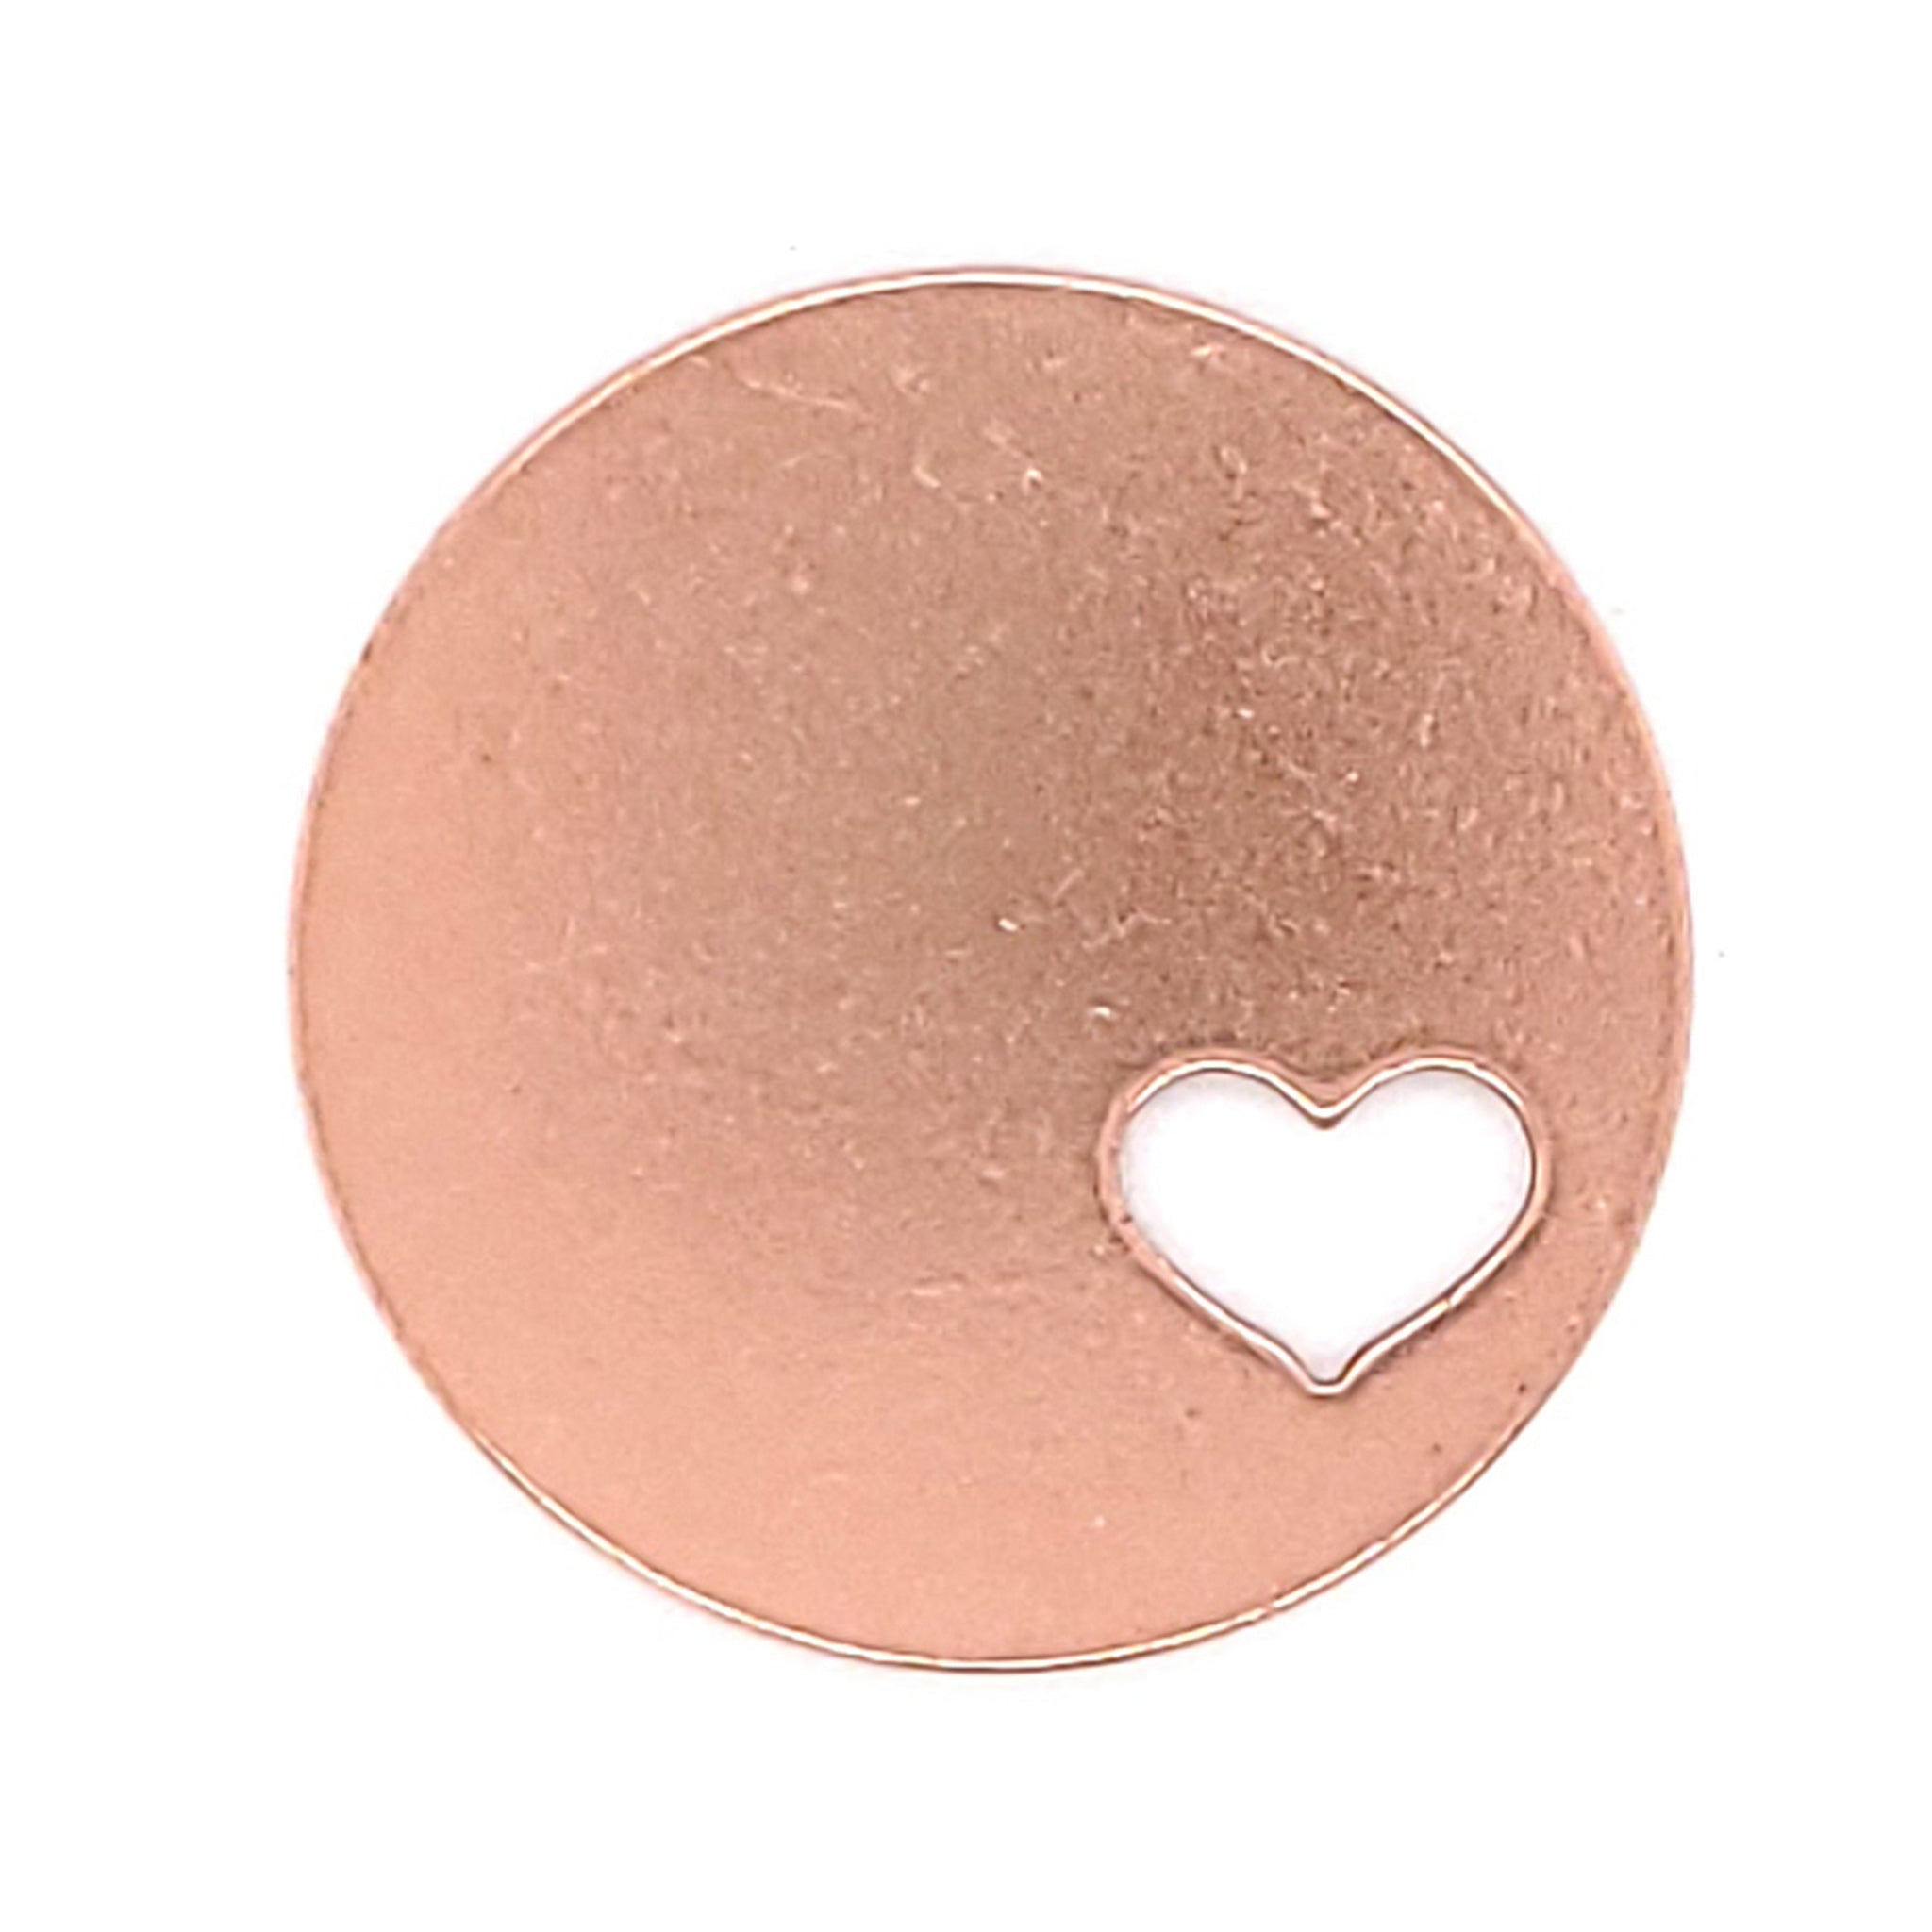 Copper blank round heart cutout pendant-copper jewelry making supplies copper wire for jewelry making how do you clean copper jewelry how to keep copper jewelry from tarnishing native american copper jewelry real copper jewelry vintage copper jewelry